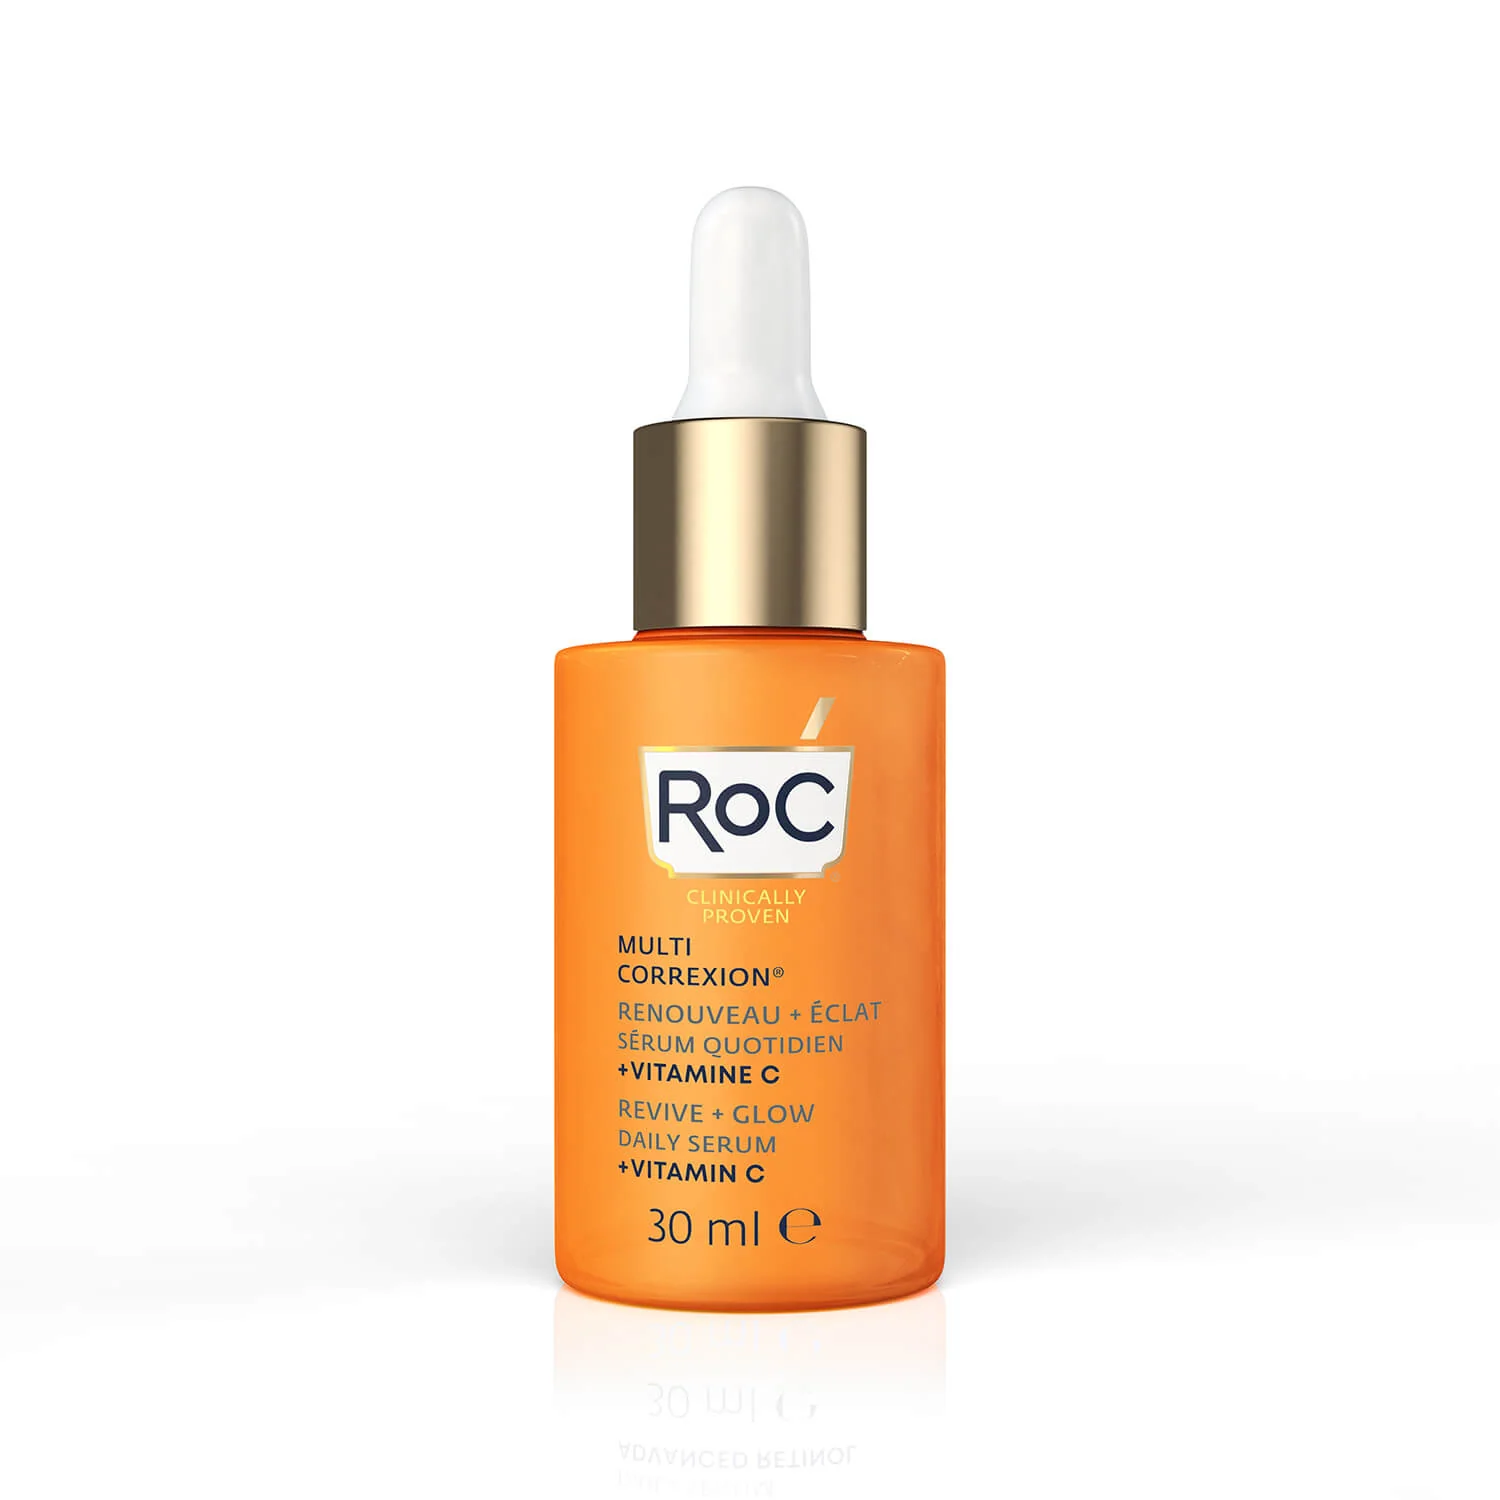 Multi Correxion Revive + Glow Daily Serum by RoC, instant luminosity and improved skin elasticity.